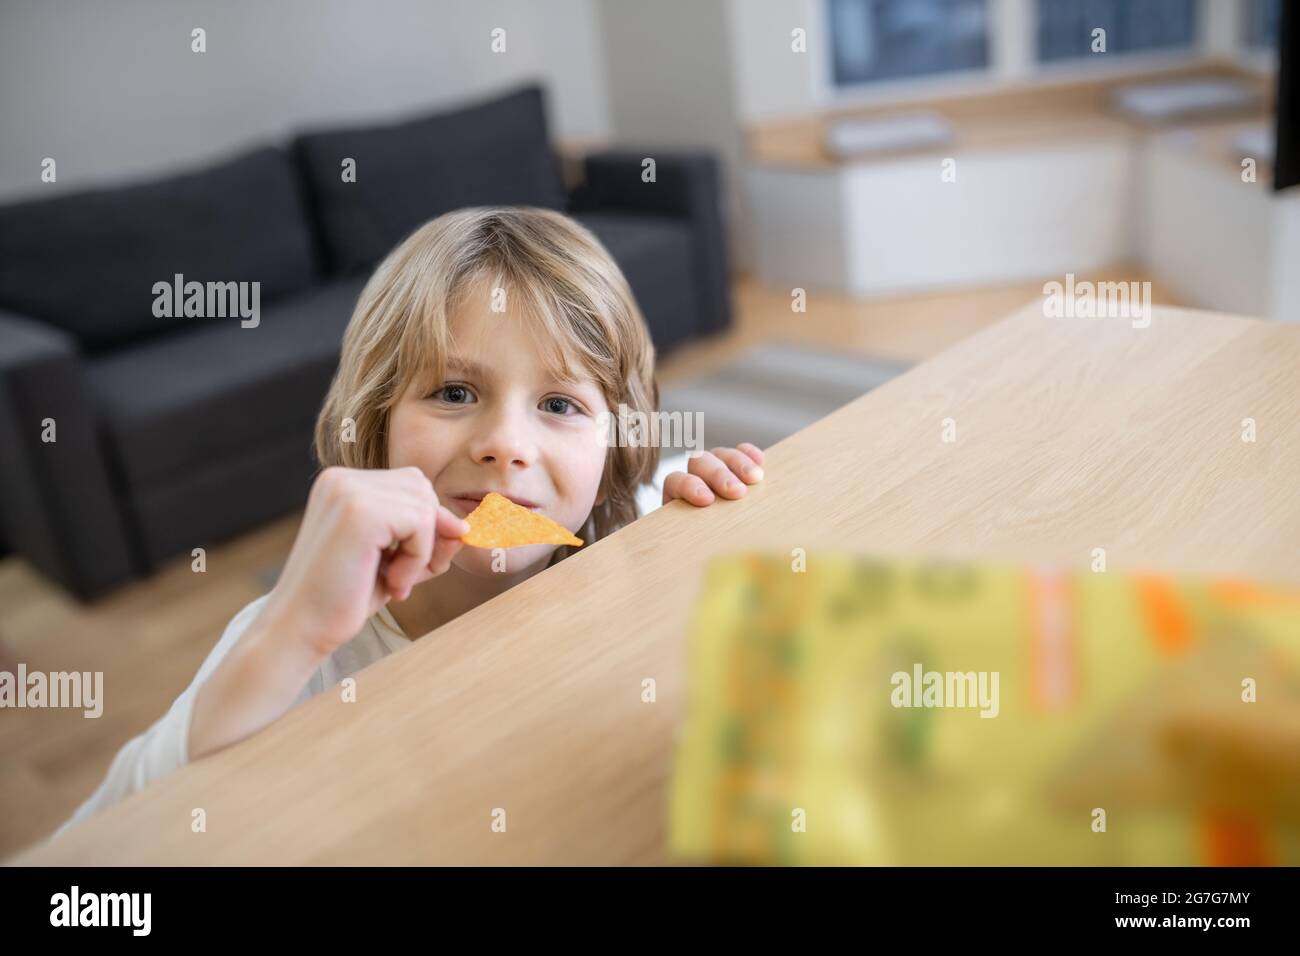 Close up picture of a cute boy eating potato chips Stock Photo